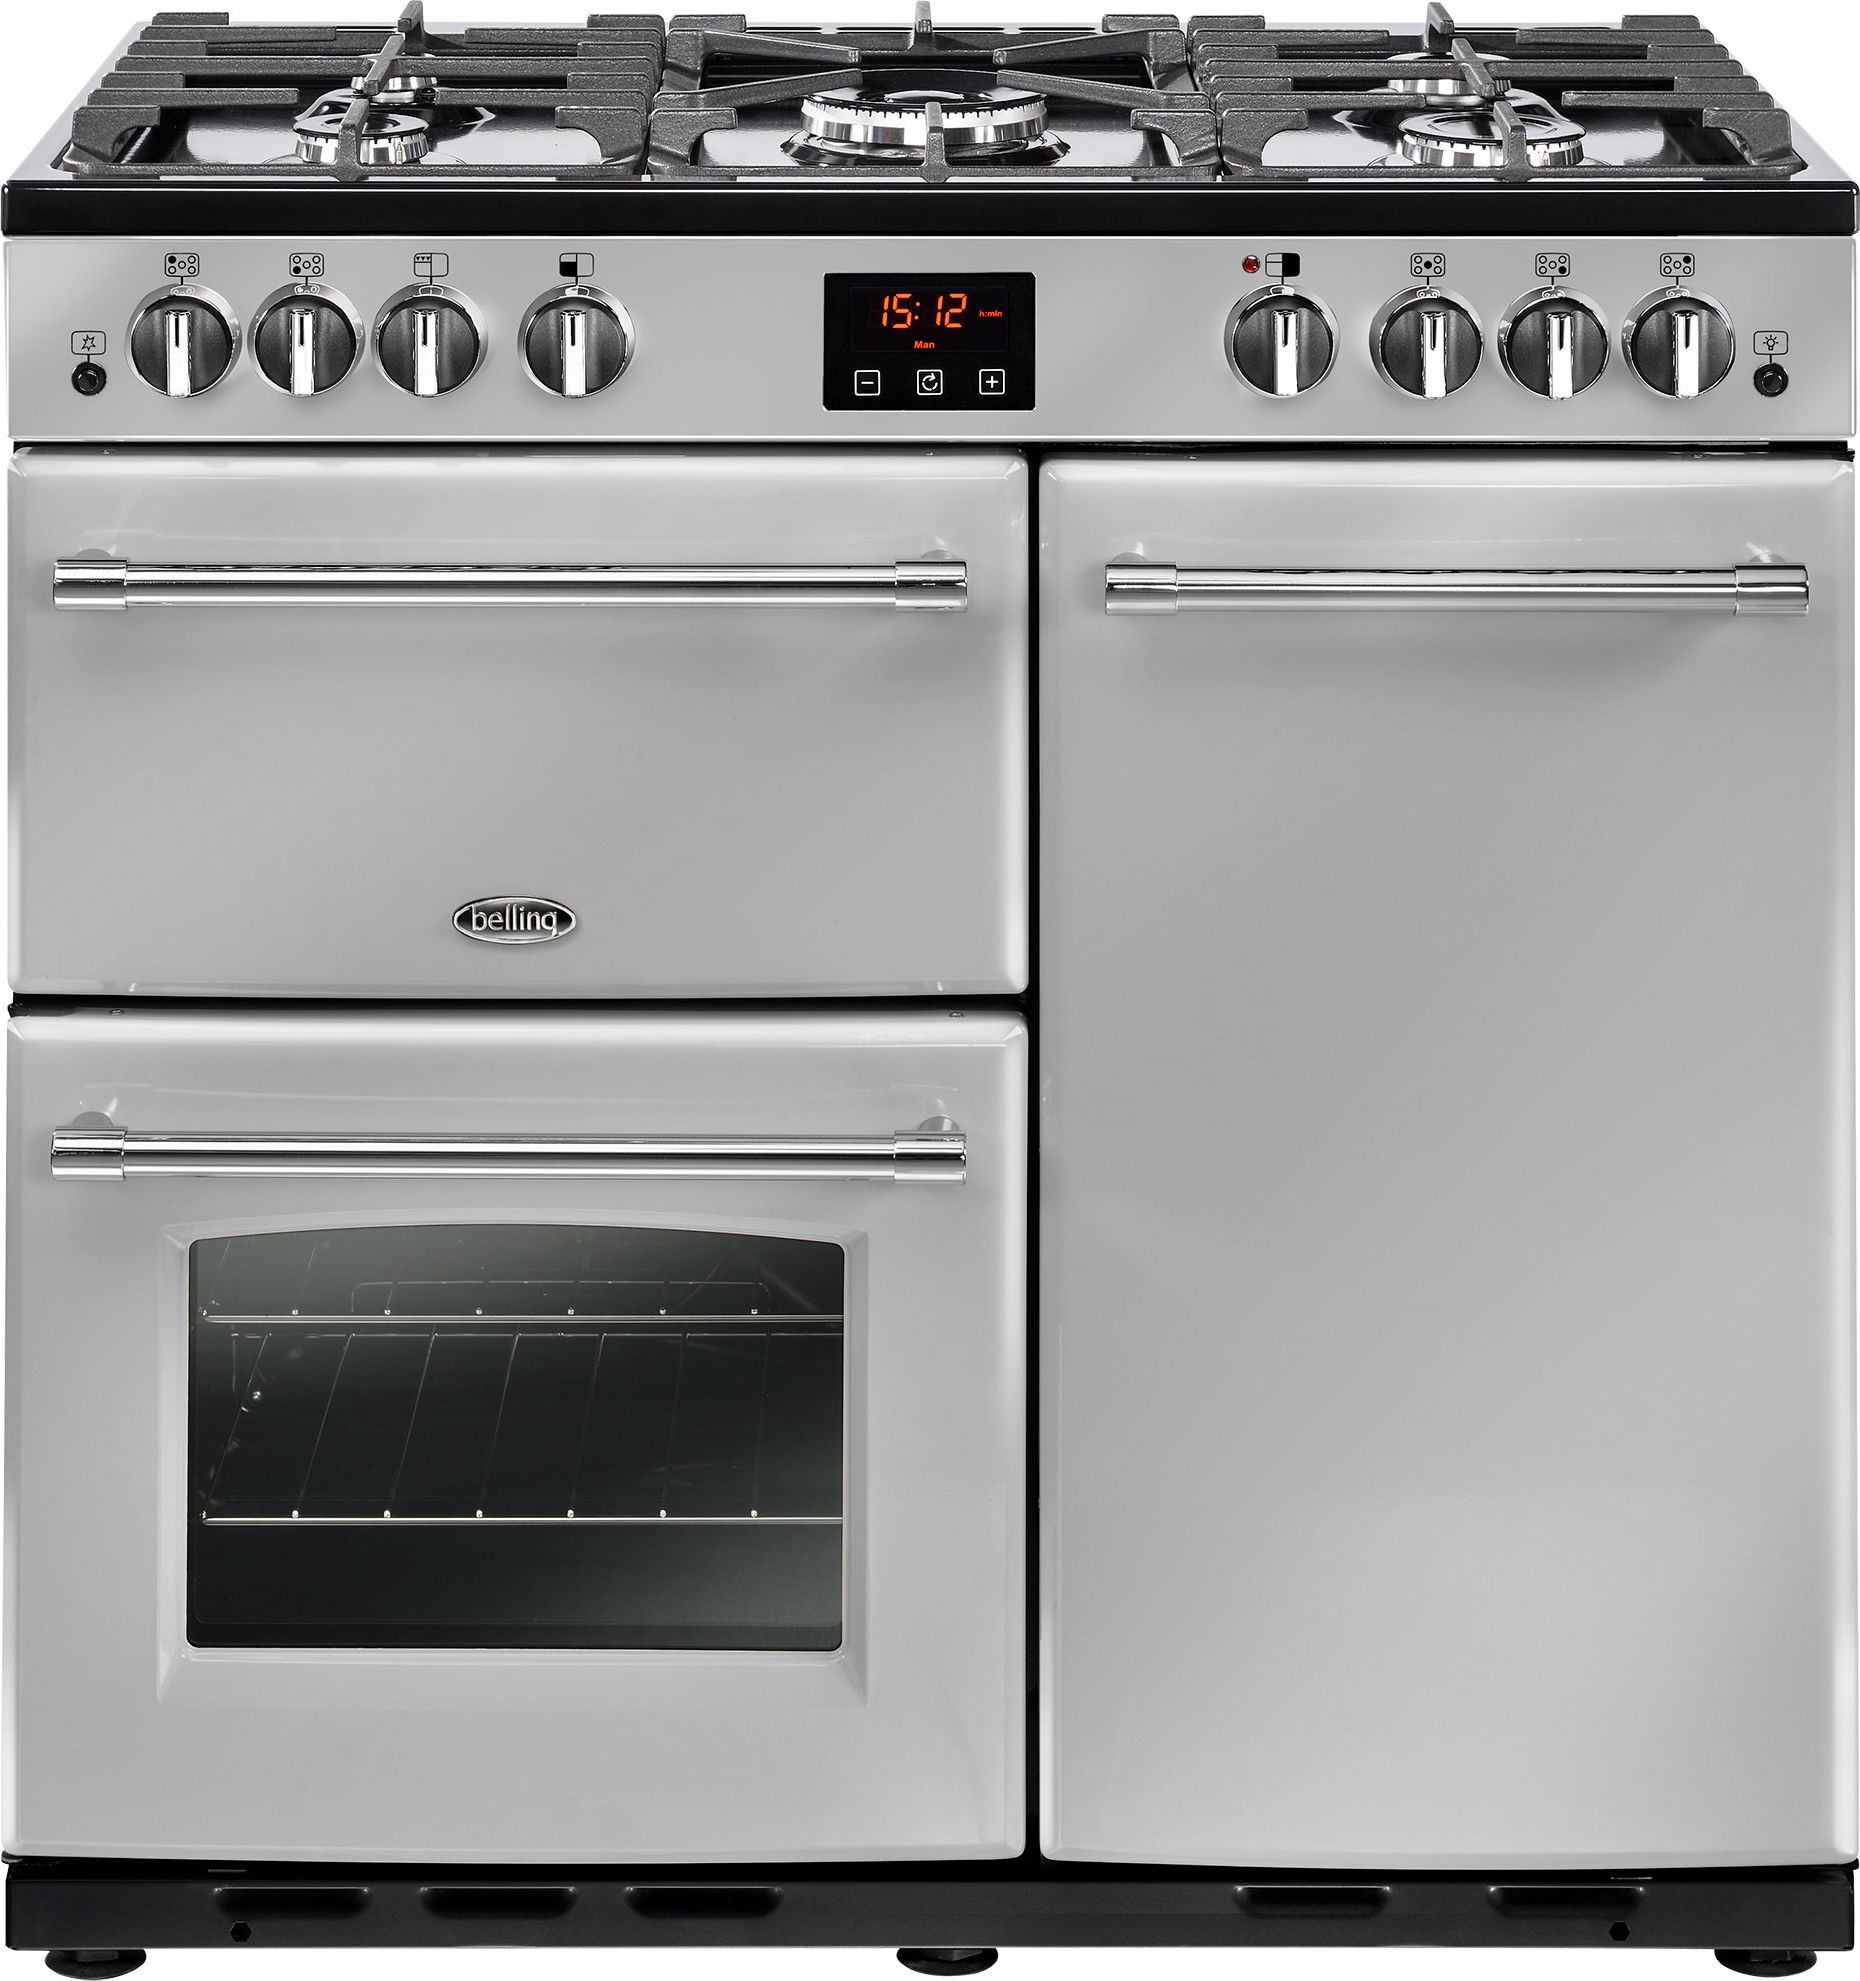 Belling FarmhouseX90G 90cm Gas Range Cooker with Electric Fan Oven - Silver - A/A Rated, Silver